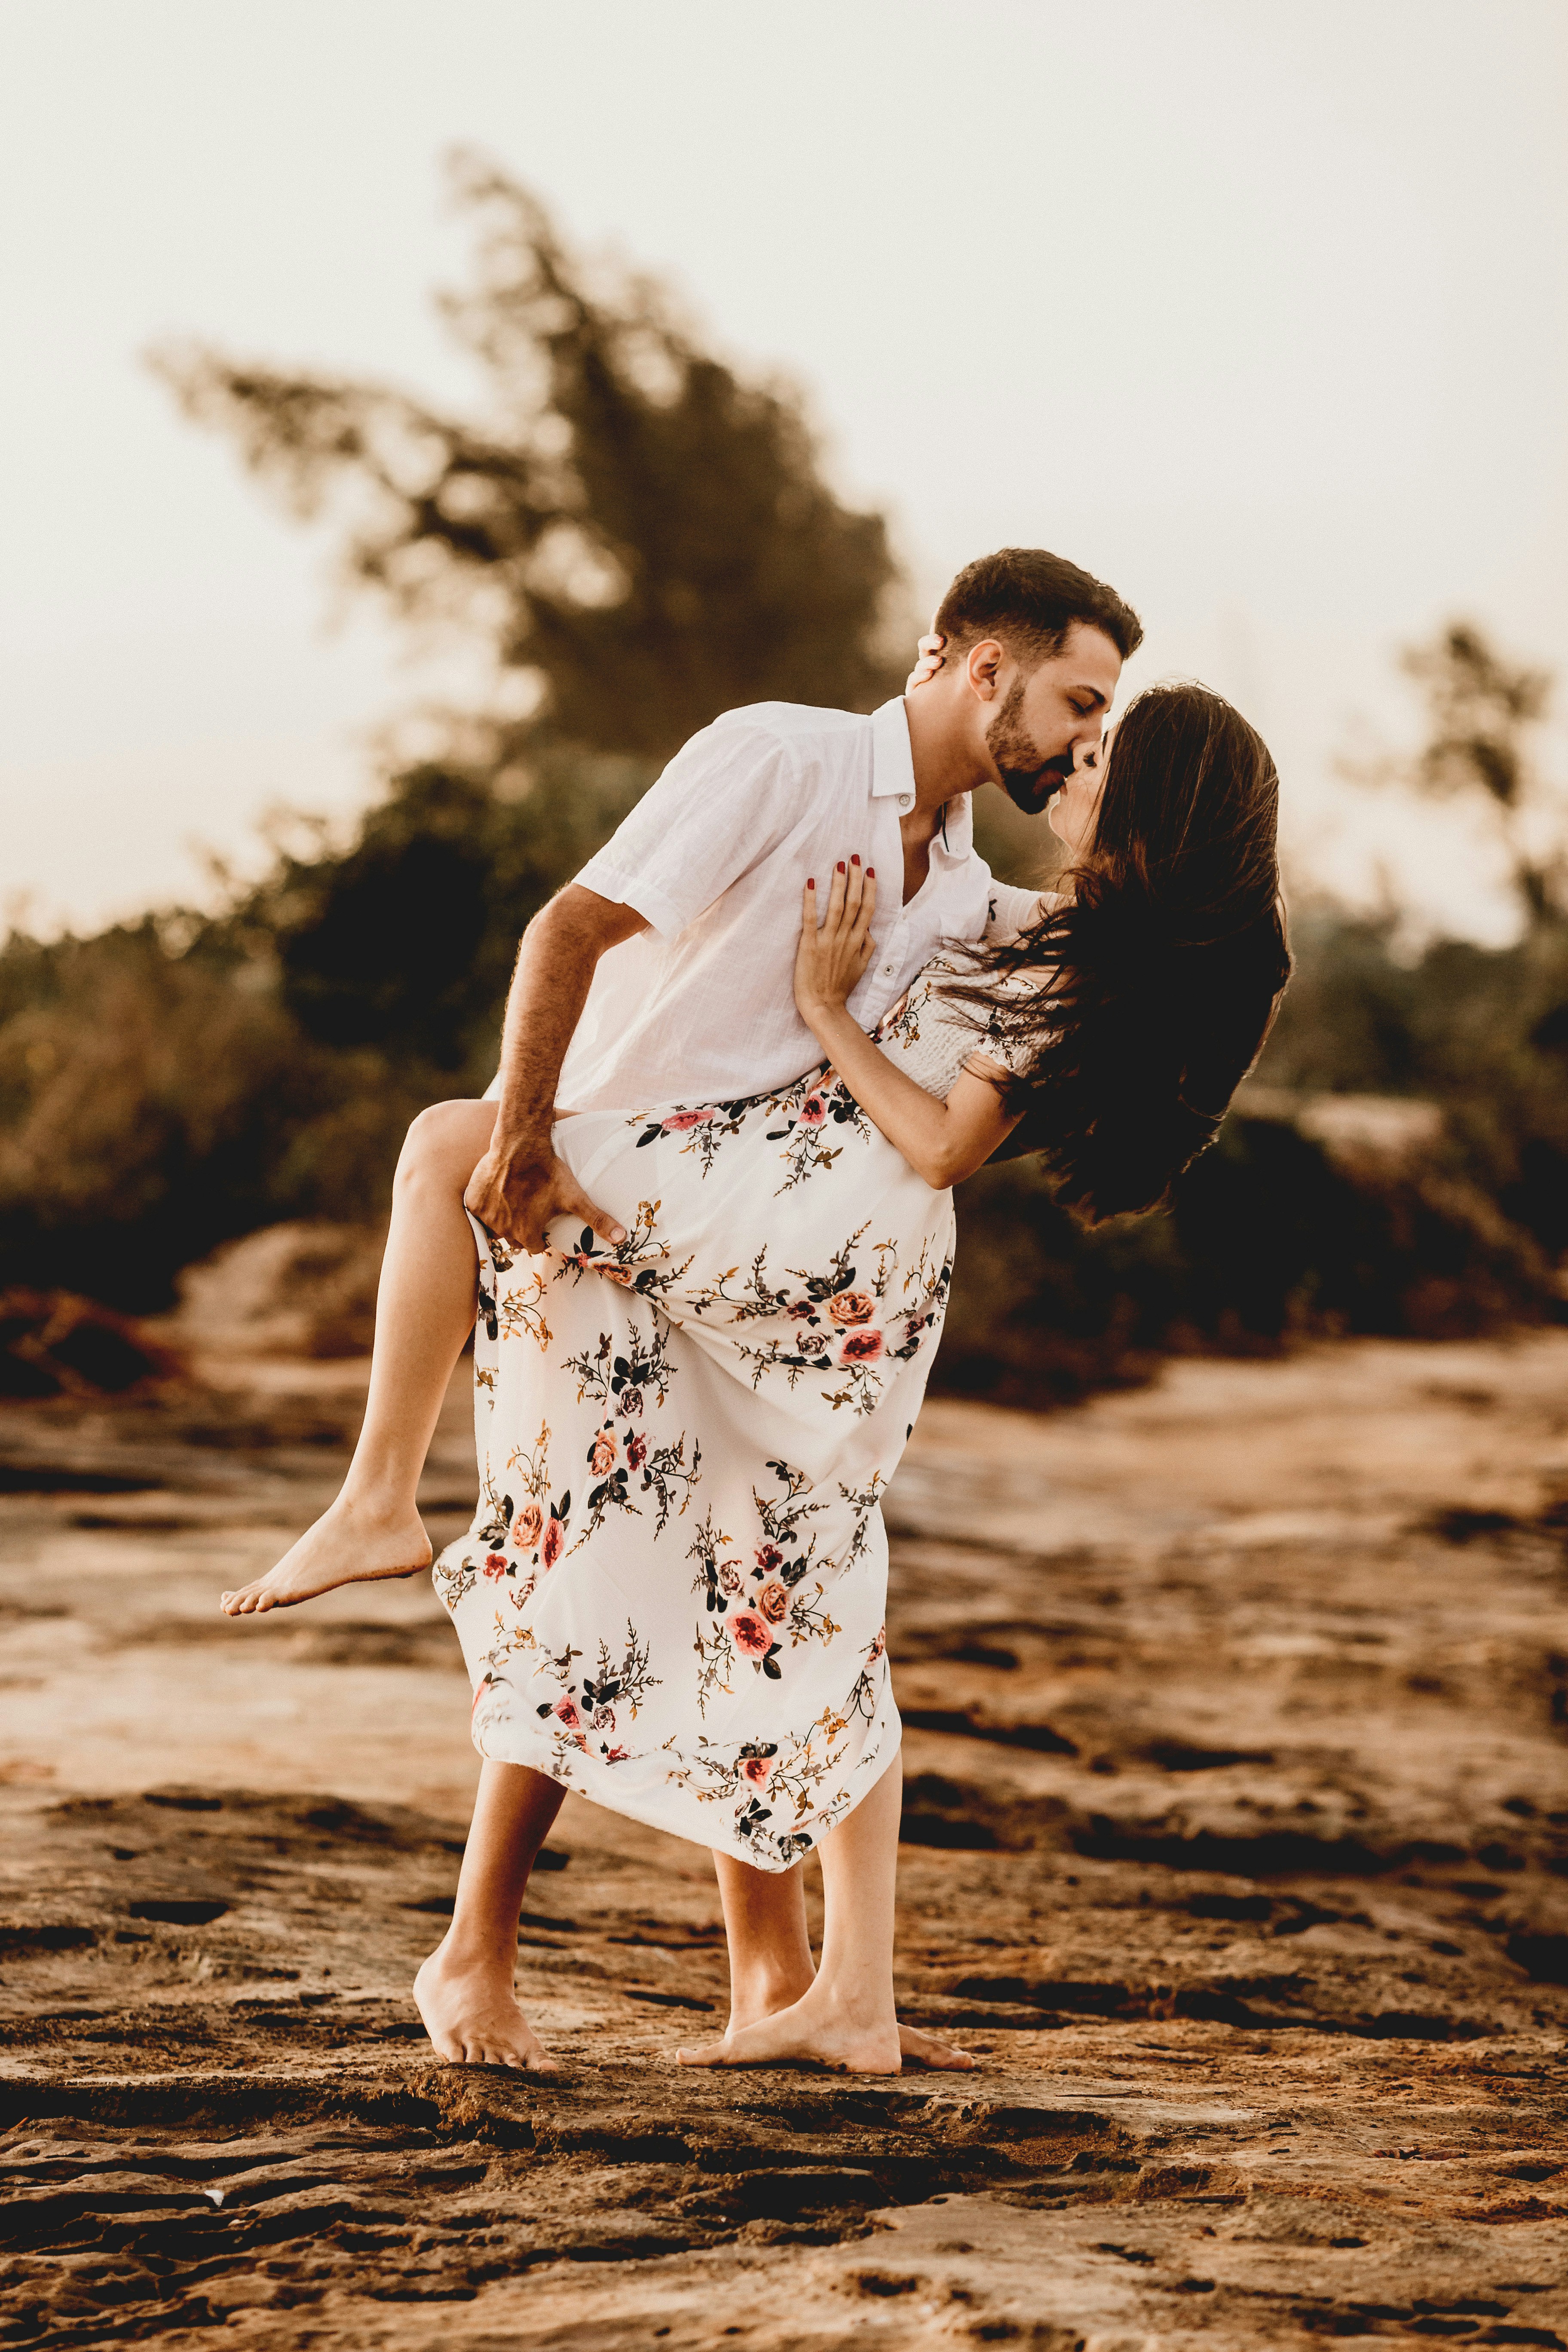 great photo recipe,how to photograph man and woman kissing on beach during daytime